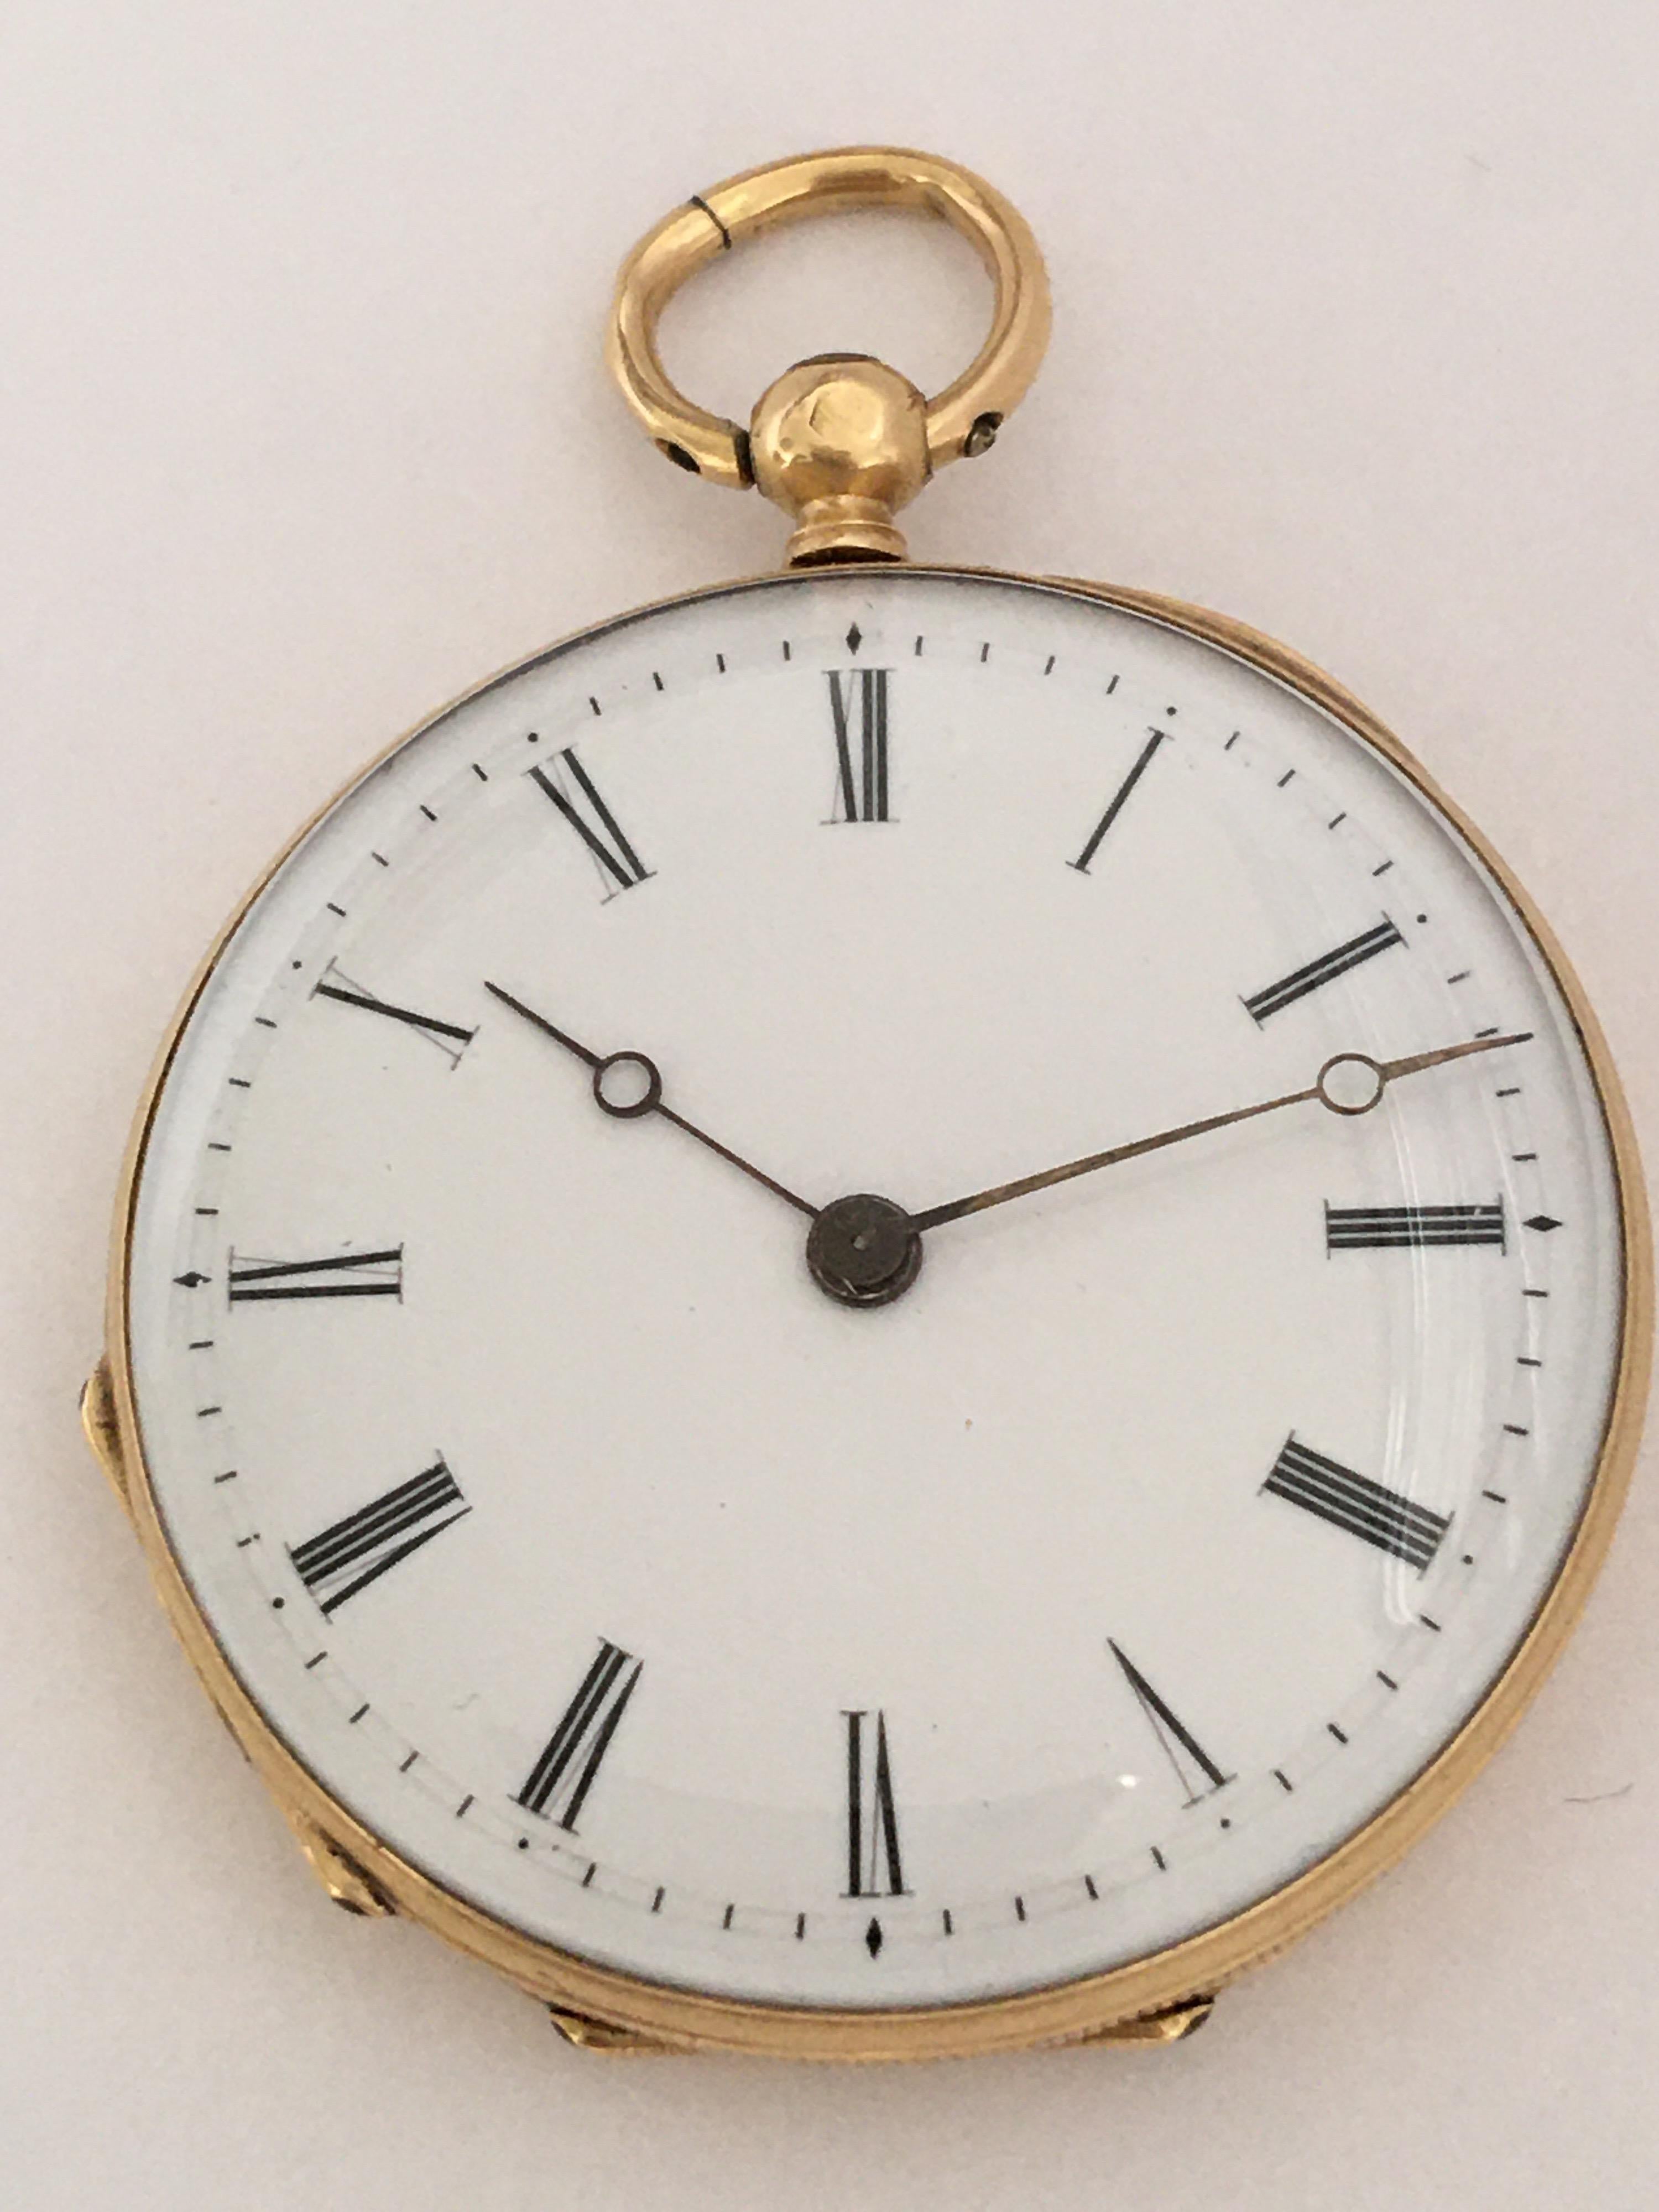 This beautiful antique key-wind ladies fob / pocket watch is working and it is ticking well. The loop or metal ring is a bit worn and looks like being soldered as shown. This watch measured 35mm diameter and weigh 26 grams.

Please study the images